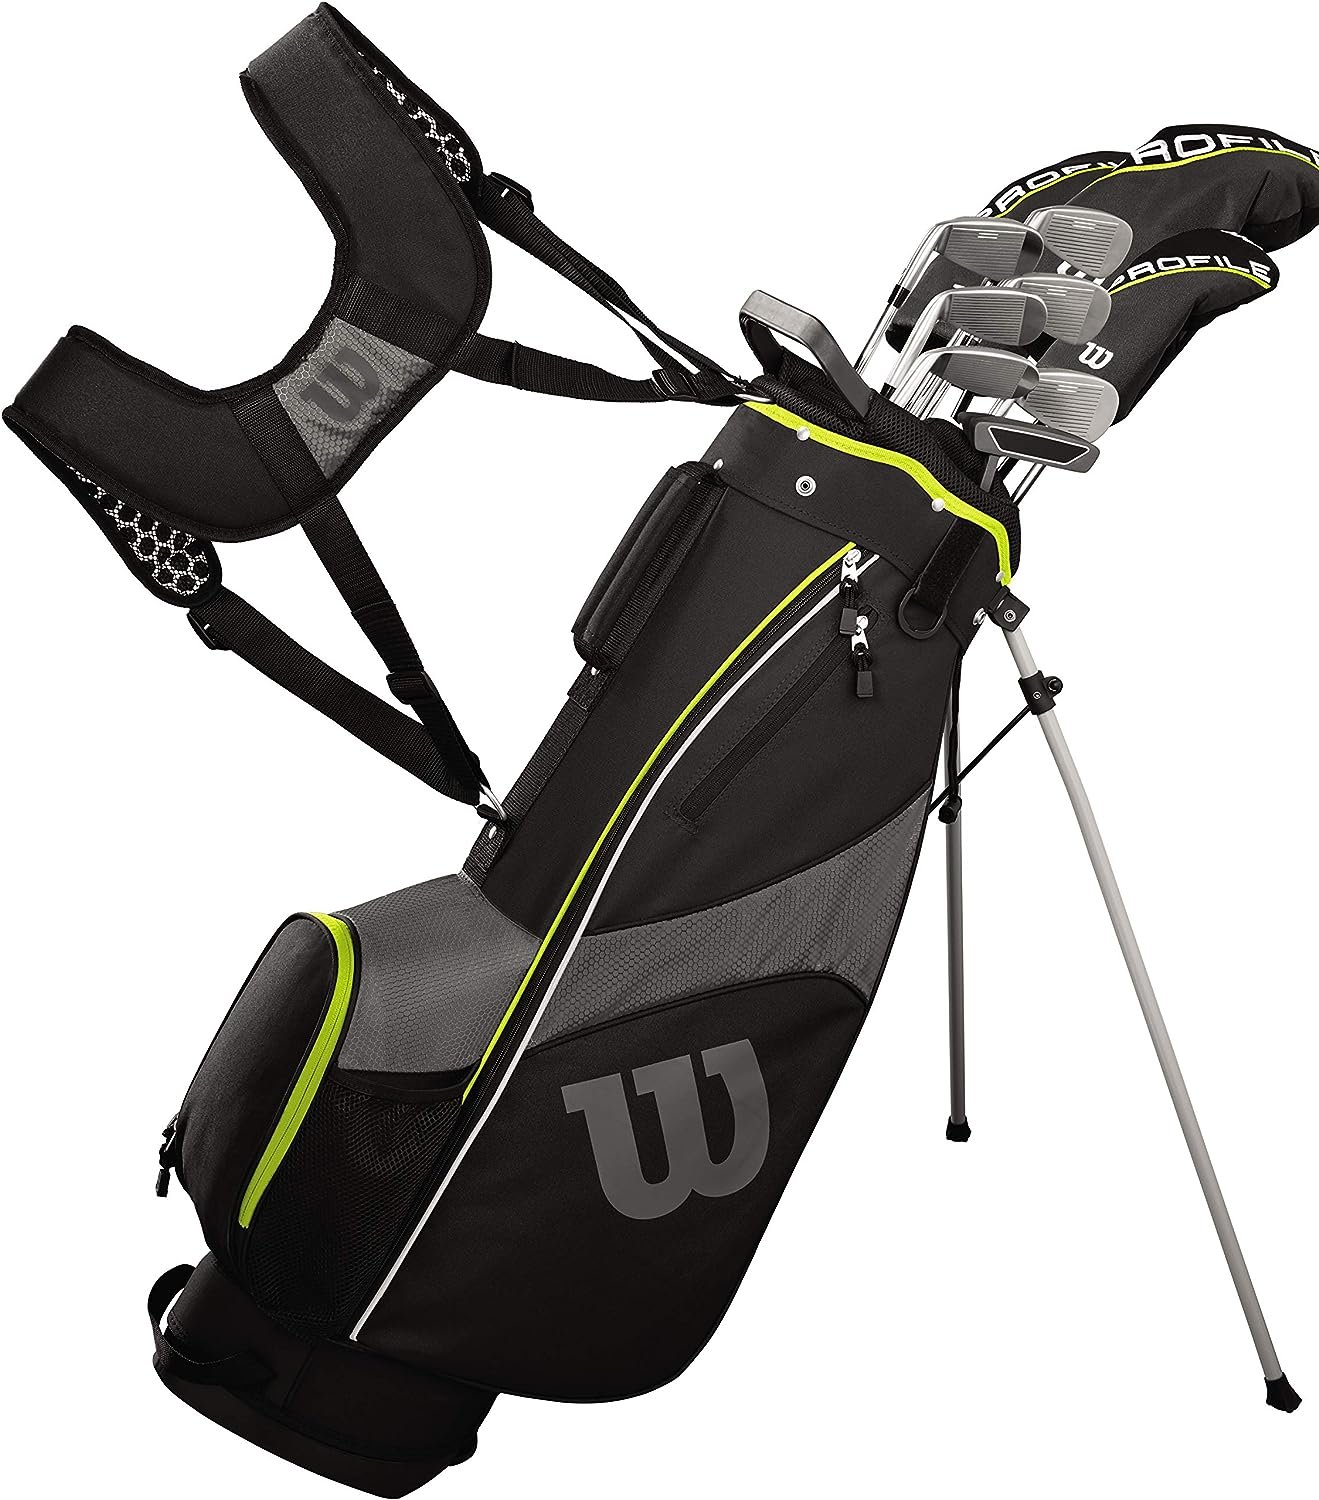 WILSON Profile XD Teen Complete Golf Club Package Set - Stand Bag